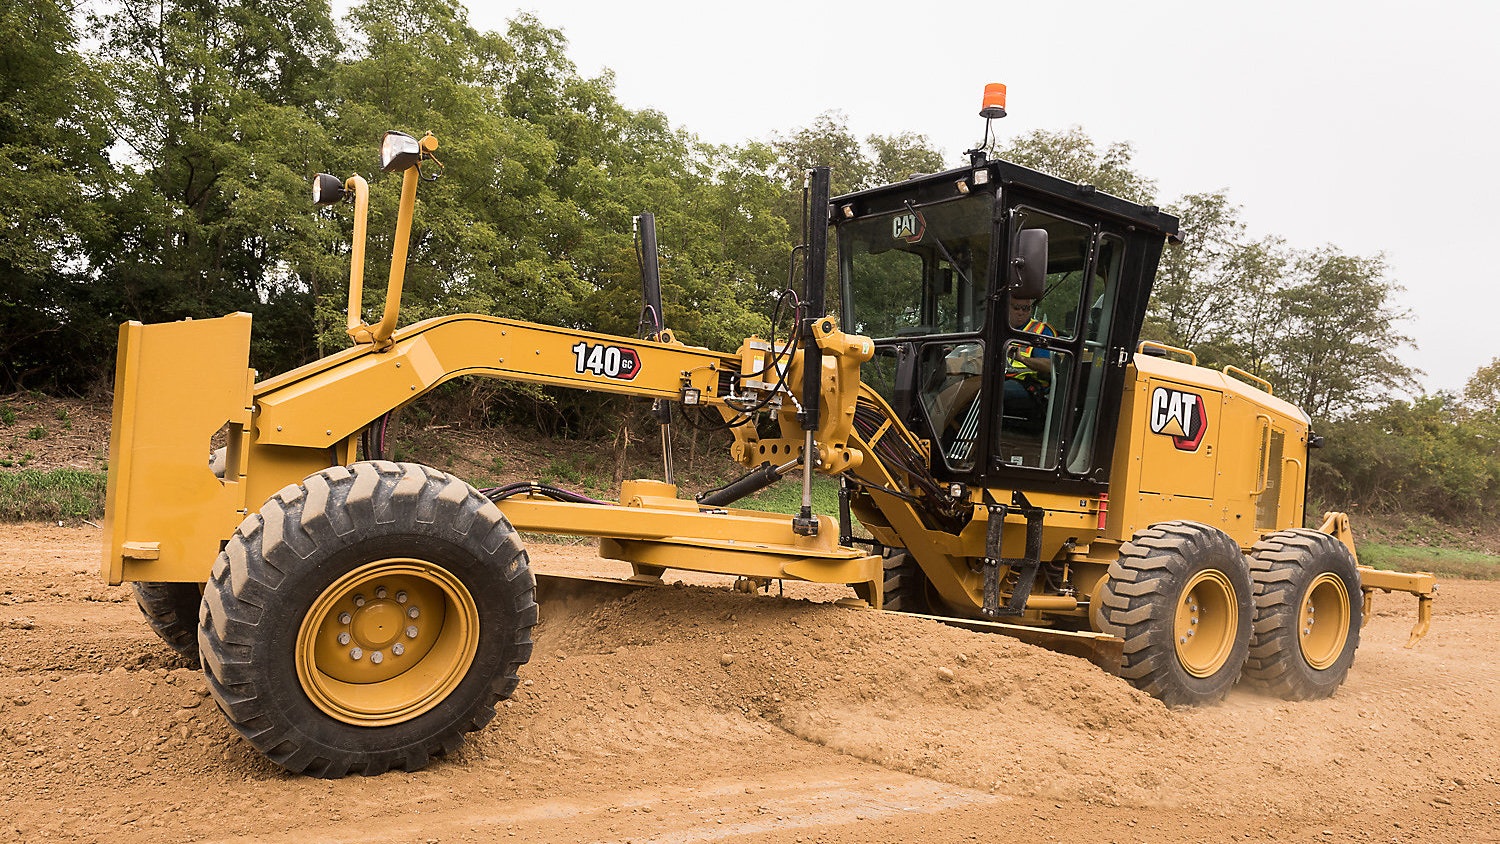 New Caterpillar Motor Grader and Grade System Aid Productivity Improvements  | OEM Off-Highway